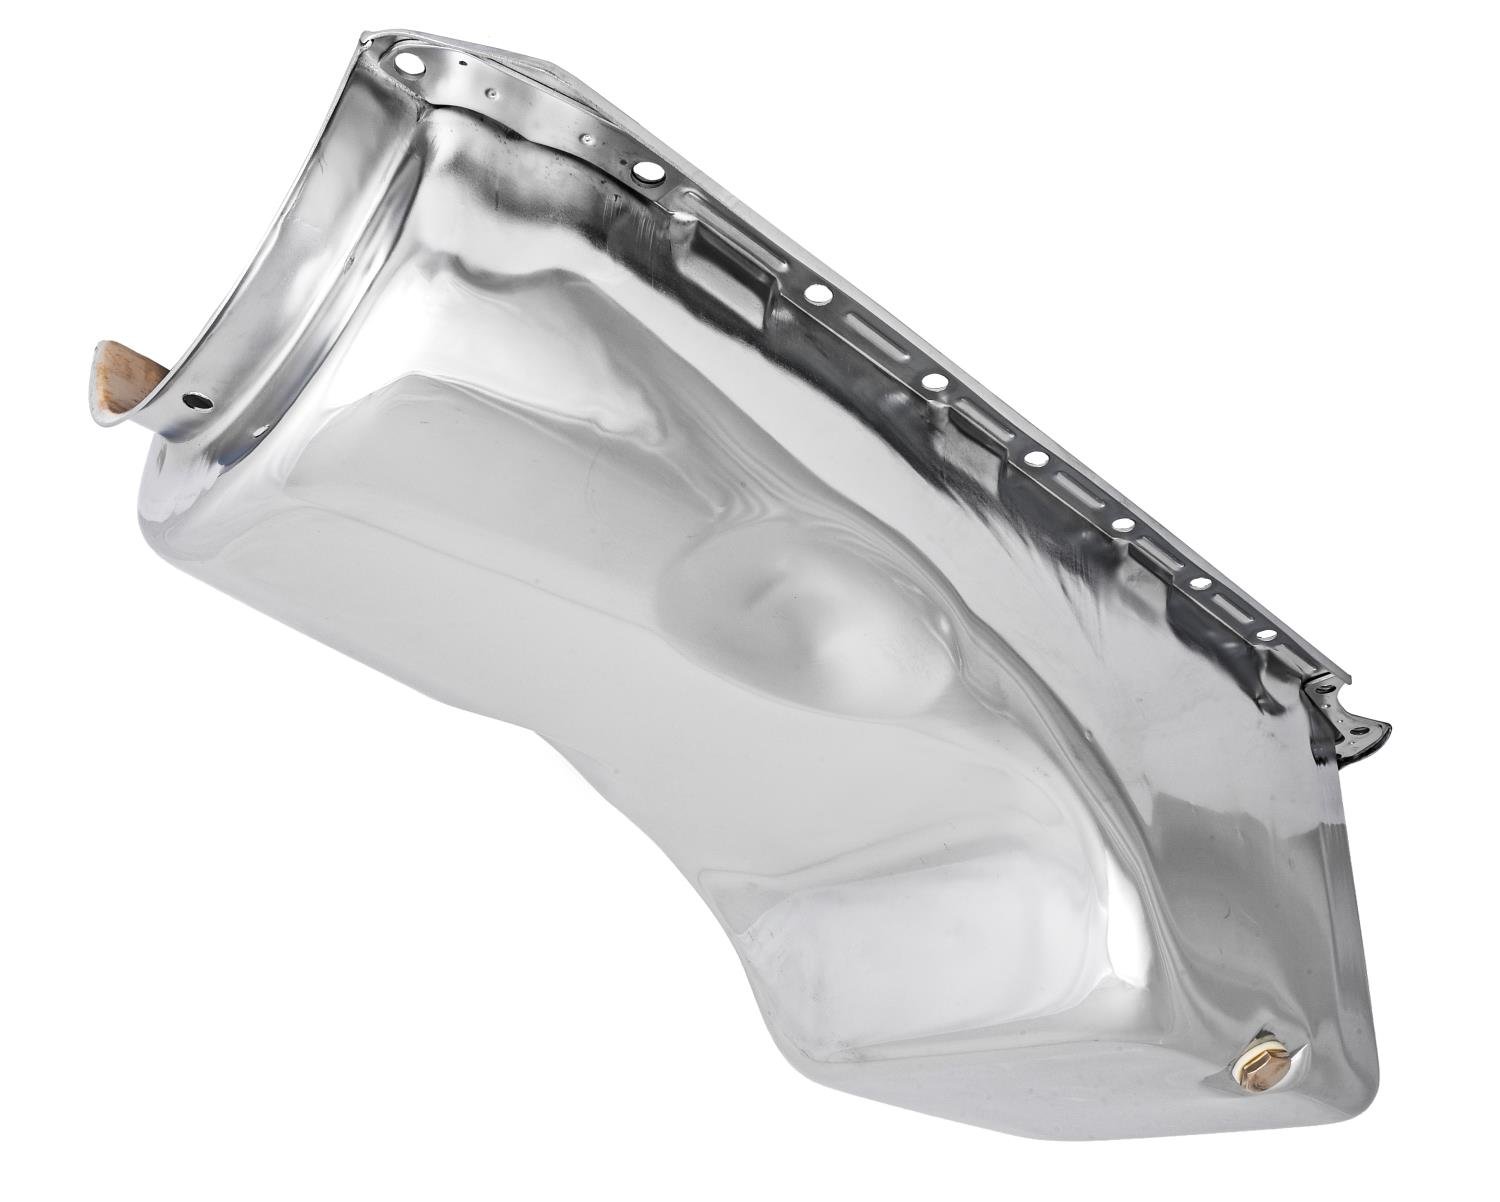 Stock-Style Replacement Oil Pan for 1965-1990 Big Block